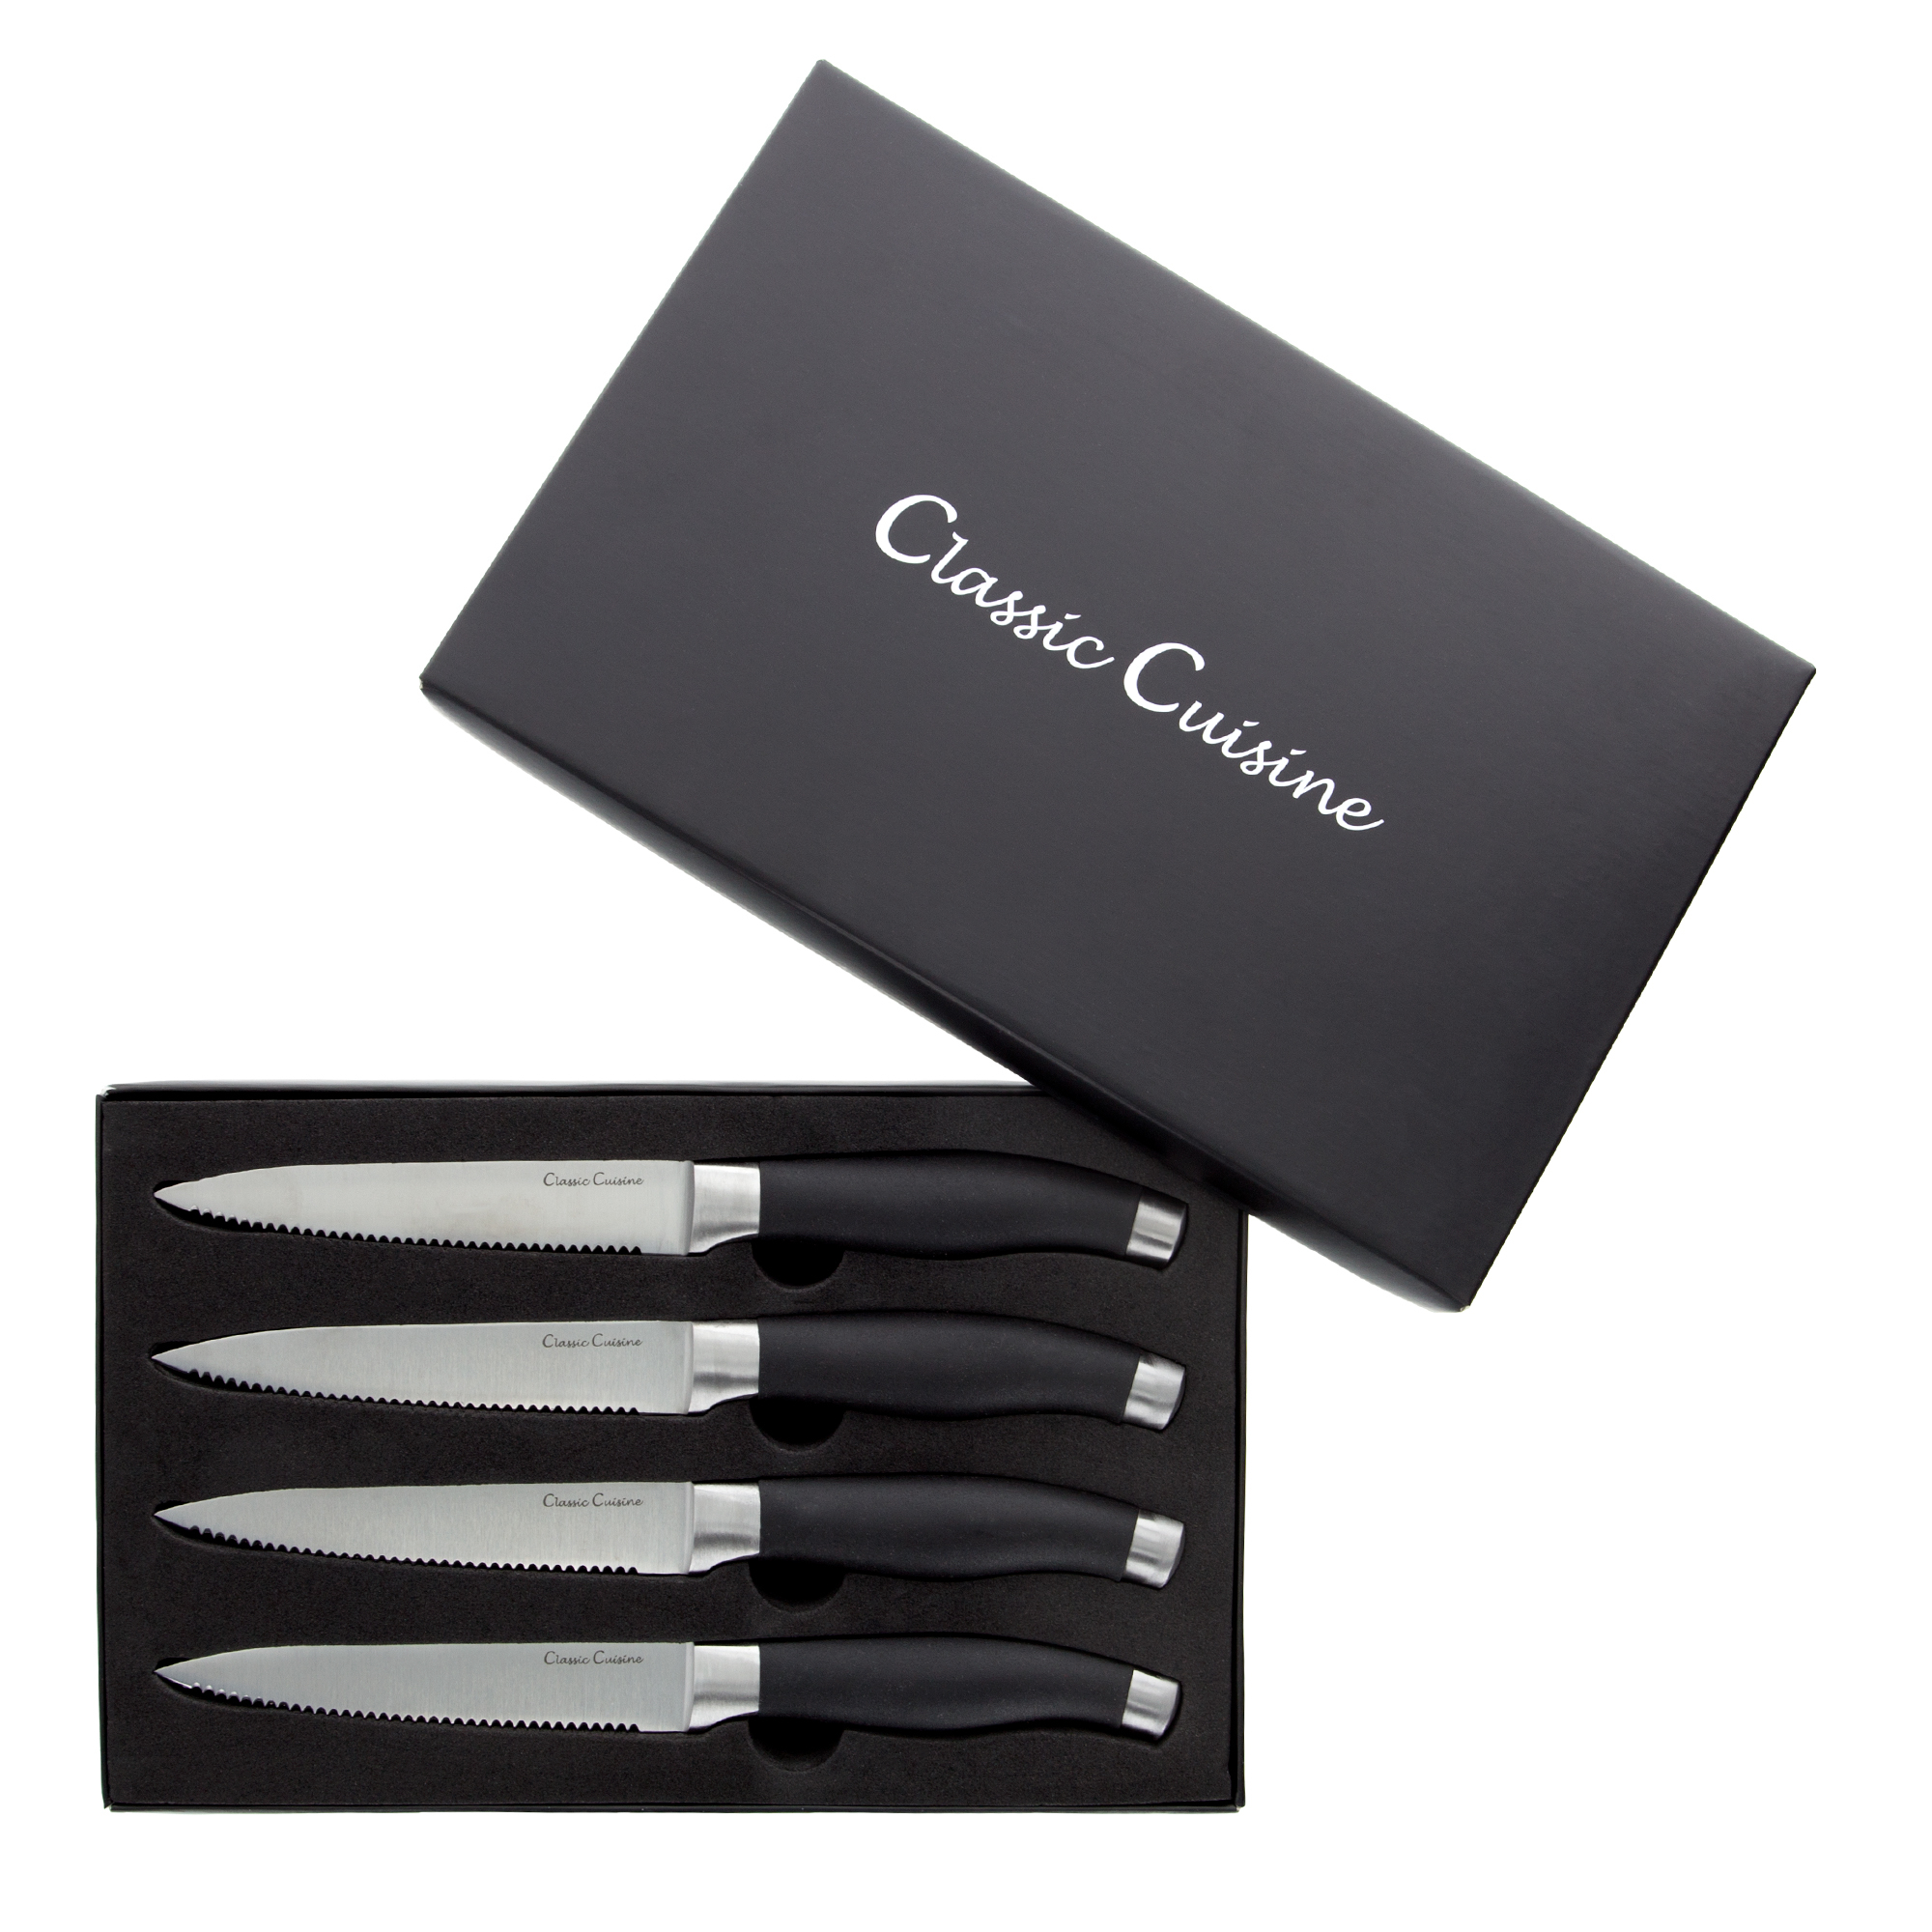 Professional Quality 4 Piece Stainless Steel Steak Knife Set 5 inch Hand Forged Serrated Edged Knives for Home or Restaurant